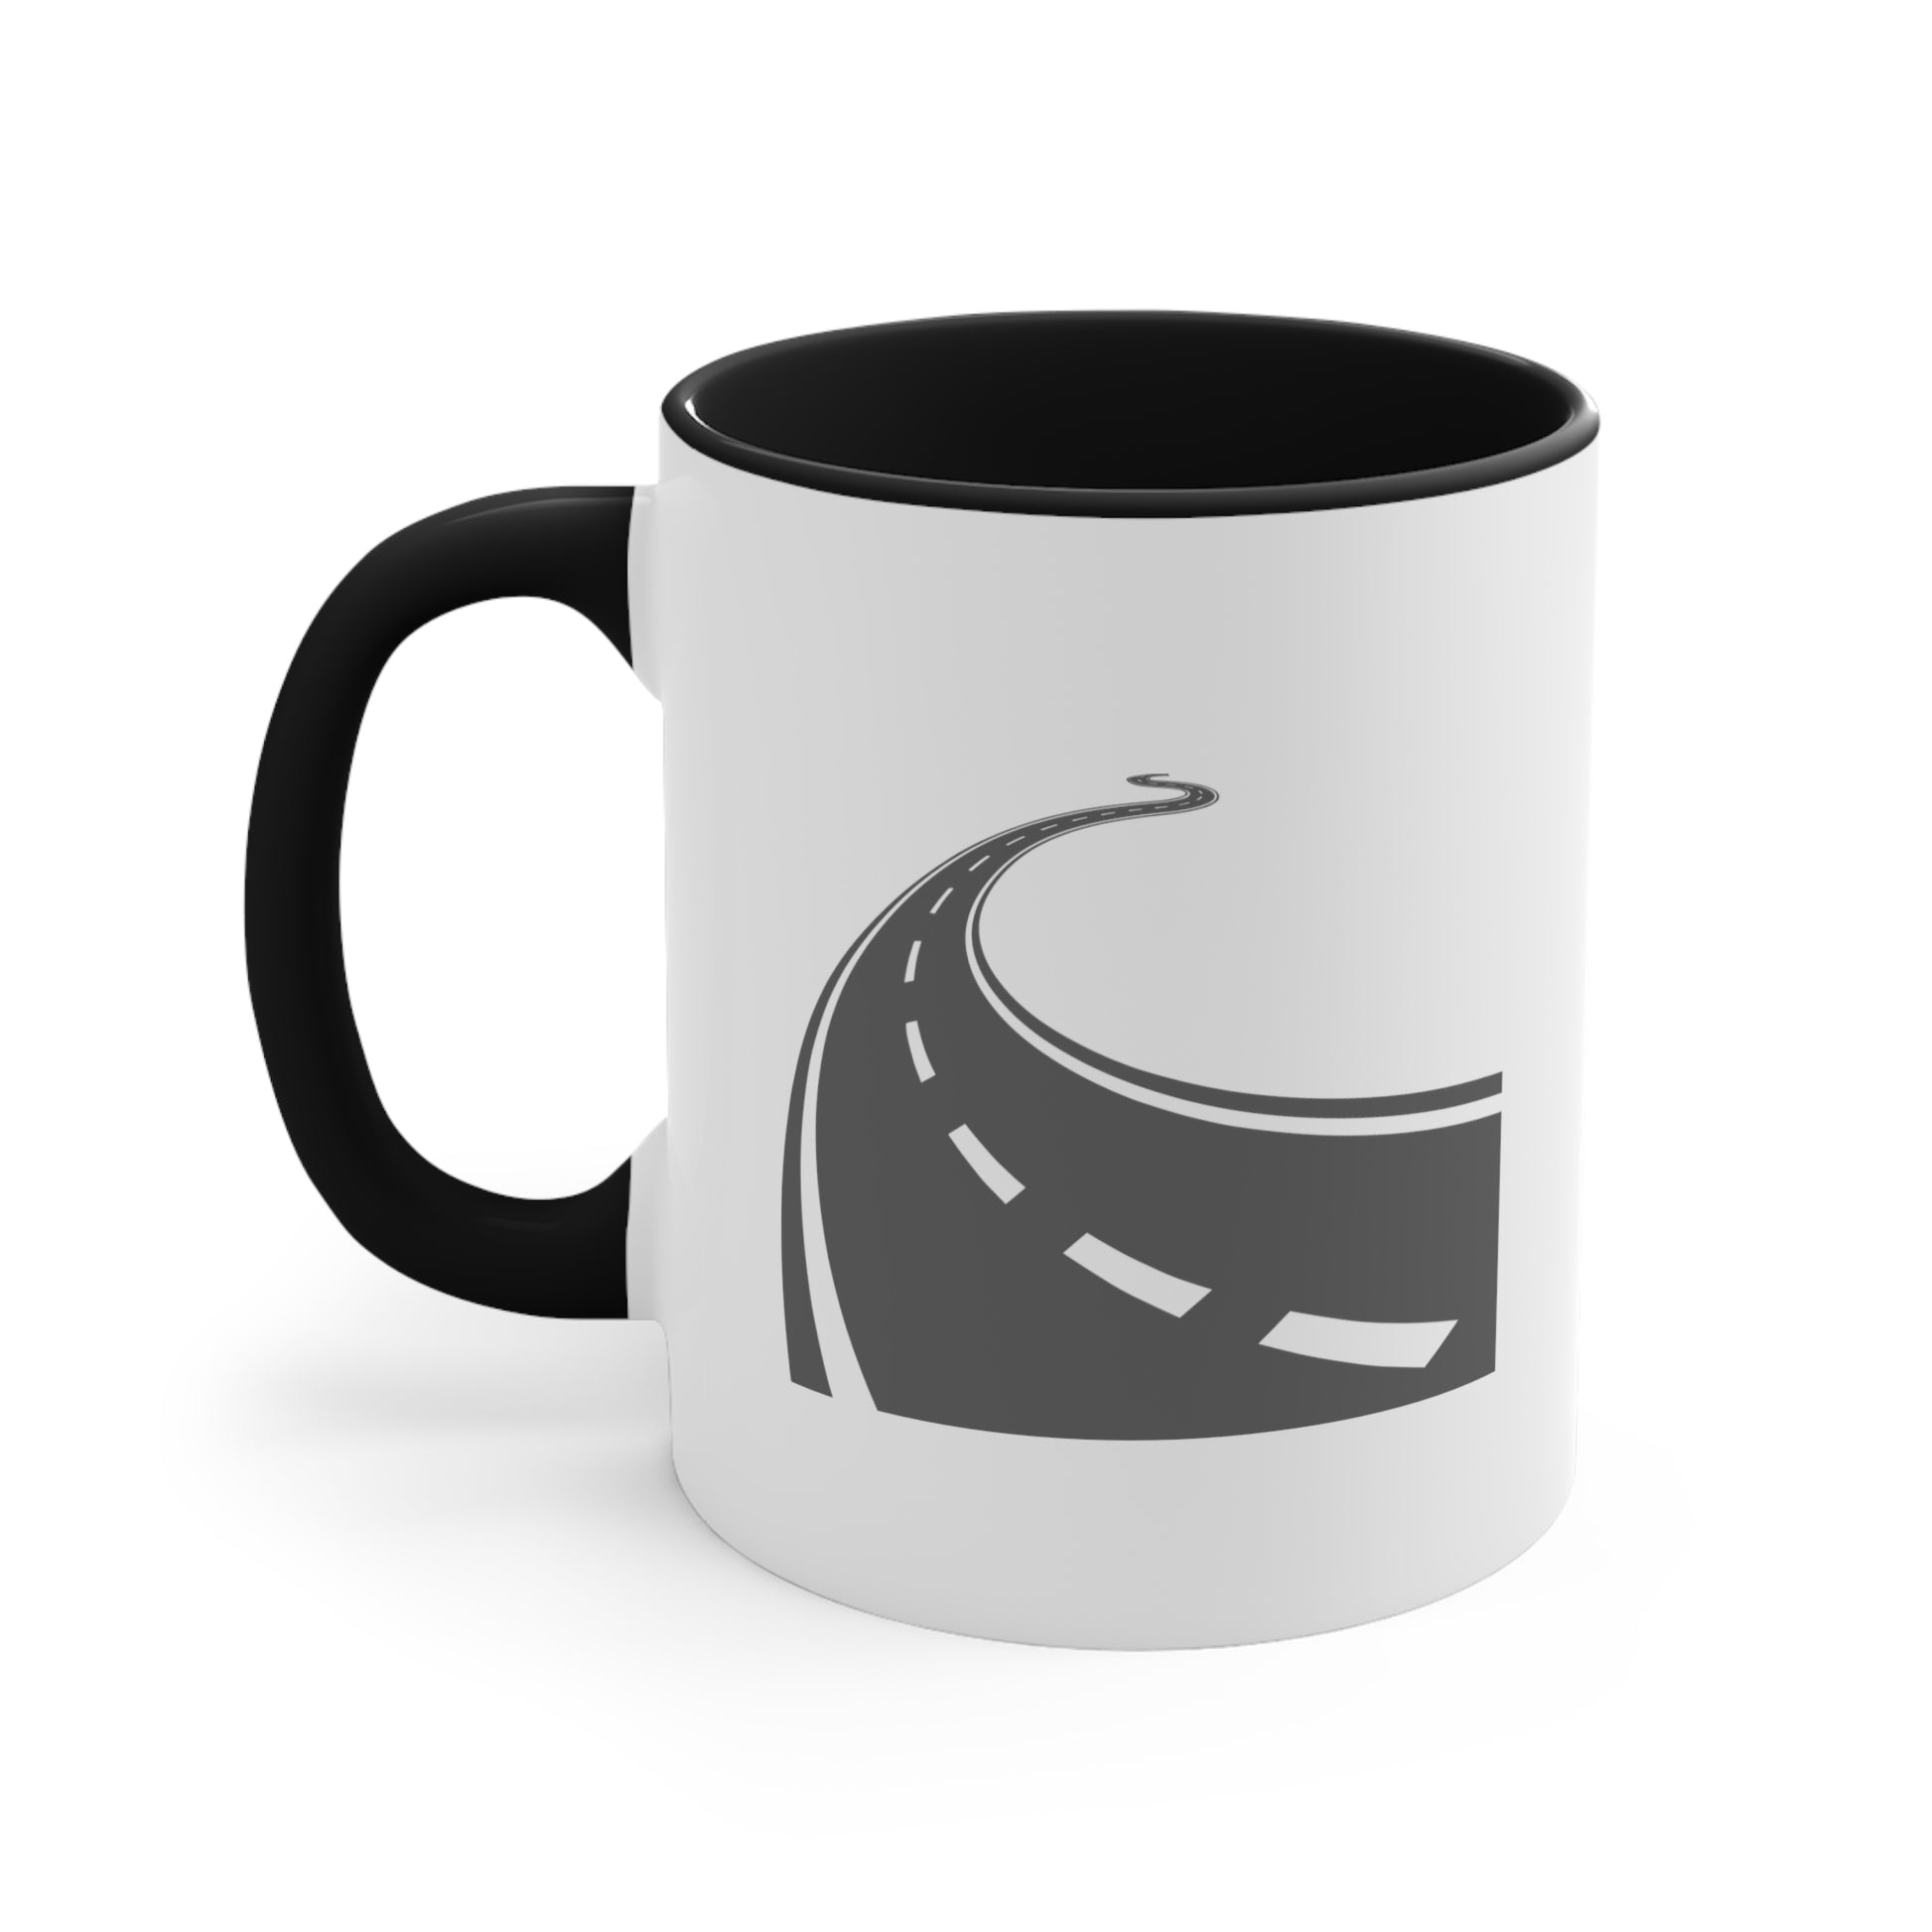 Long and Winding Road Coffee Mug - Double Sided Black Accent White Ceramic 11oz by TheGlassyLass.com